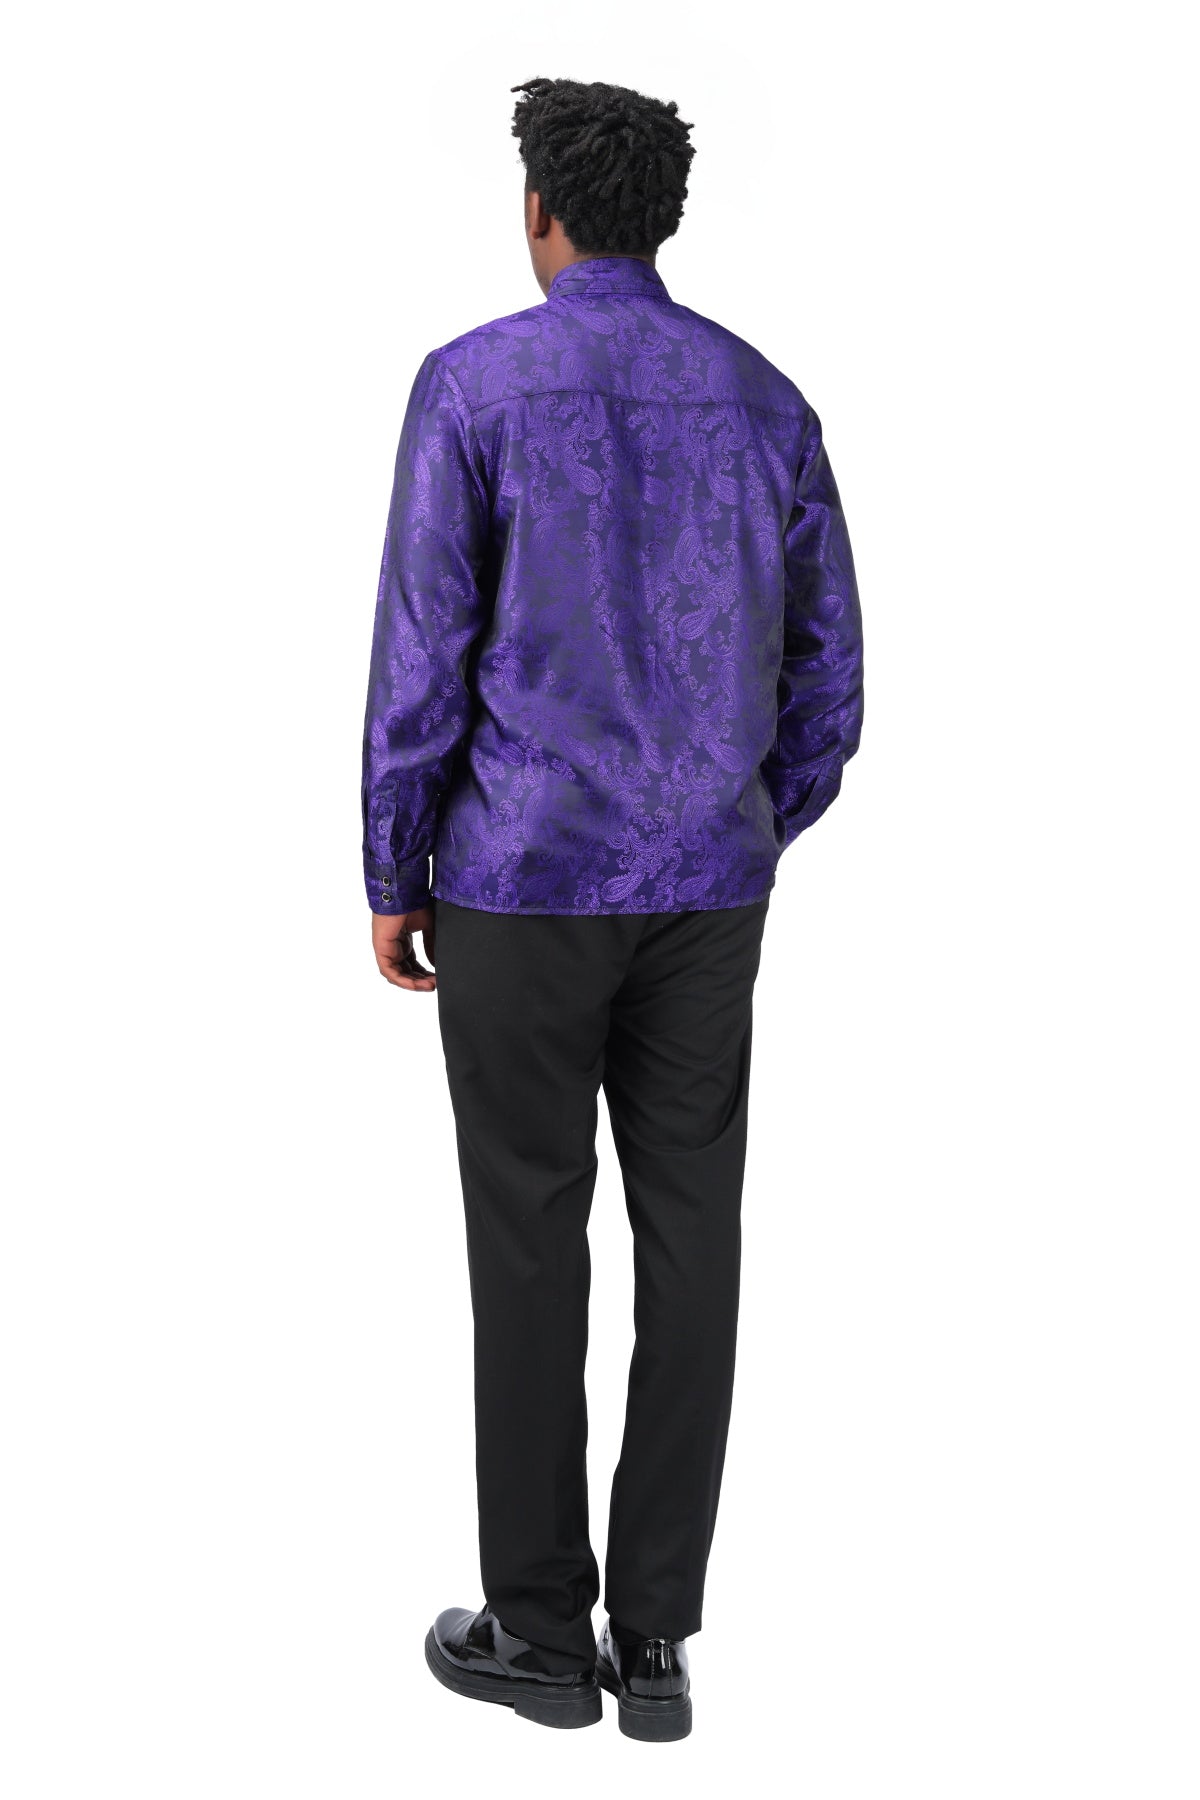 Slim Fit Embroidered Purple Paisley Shirt